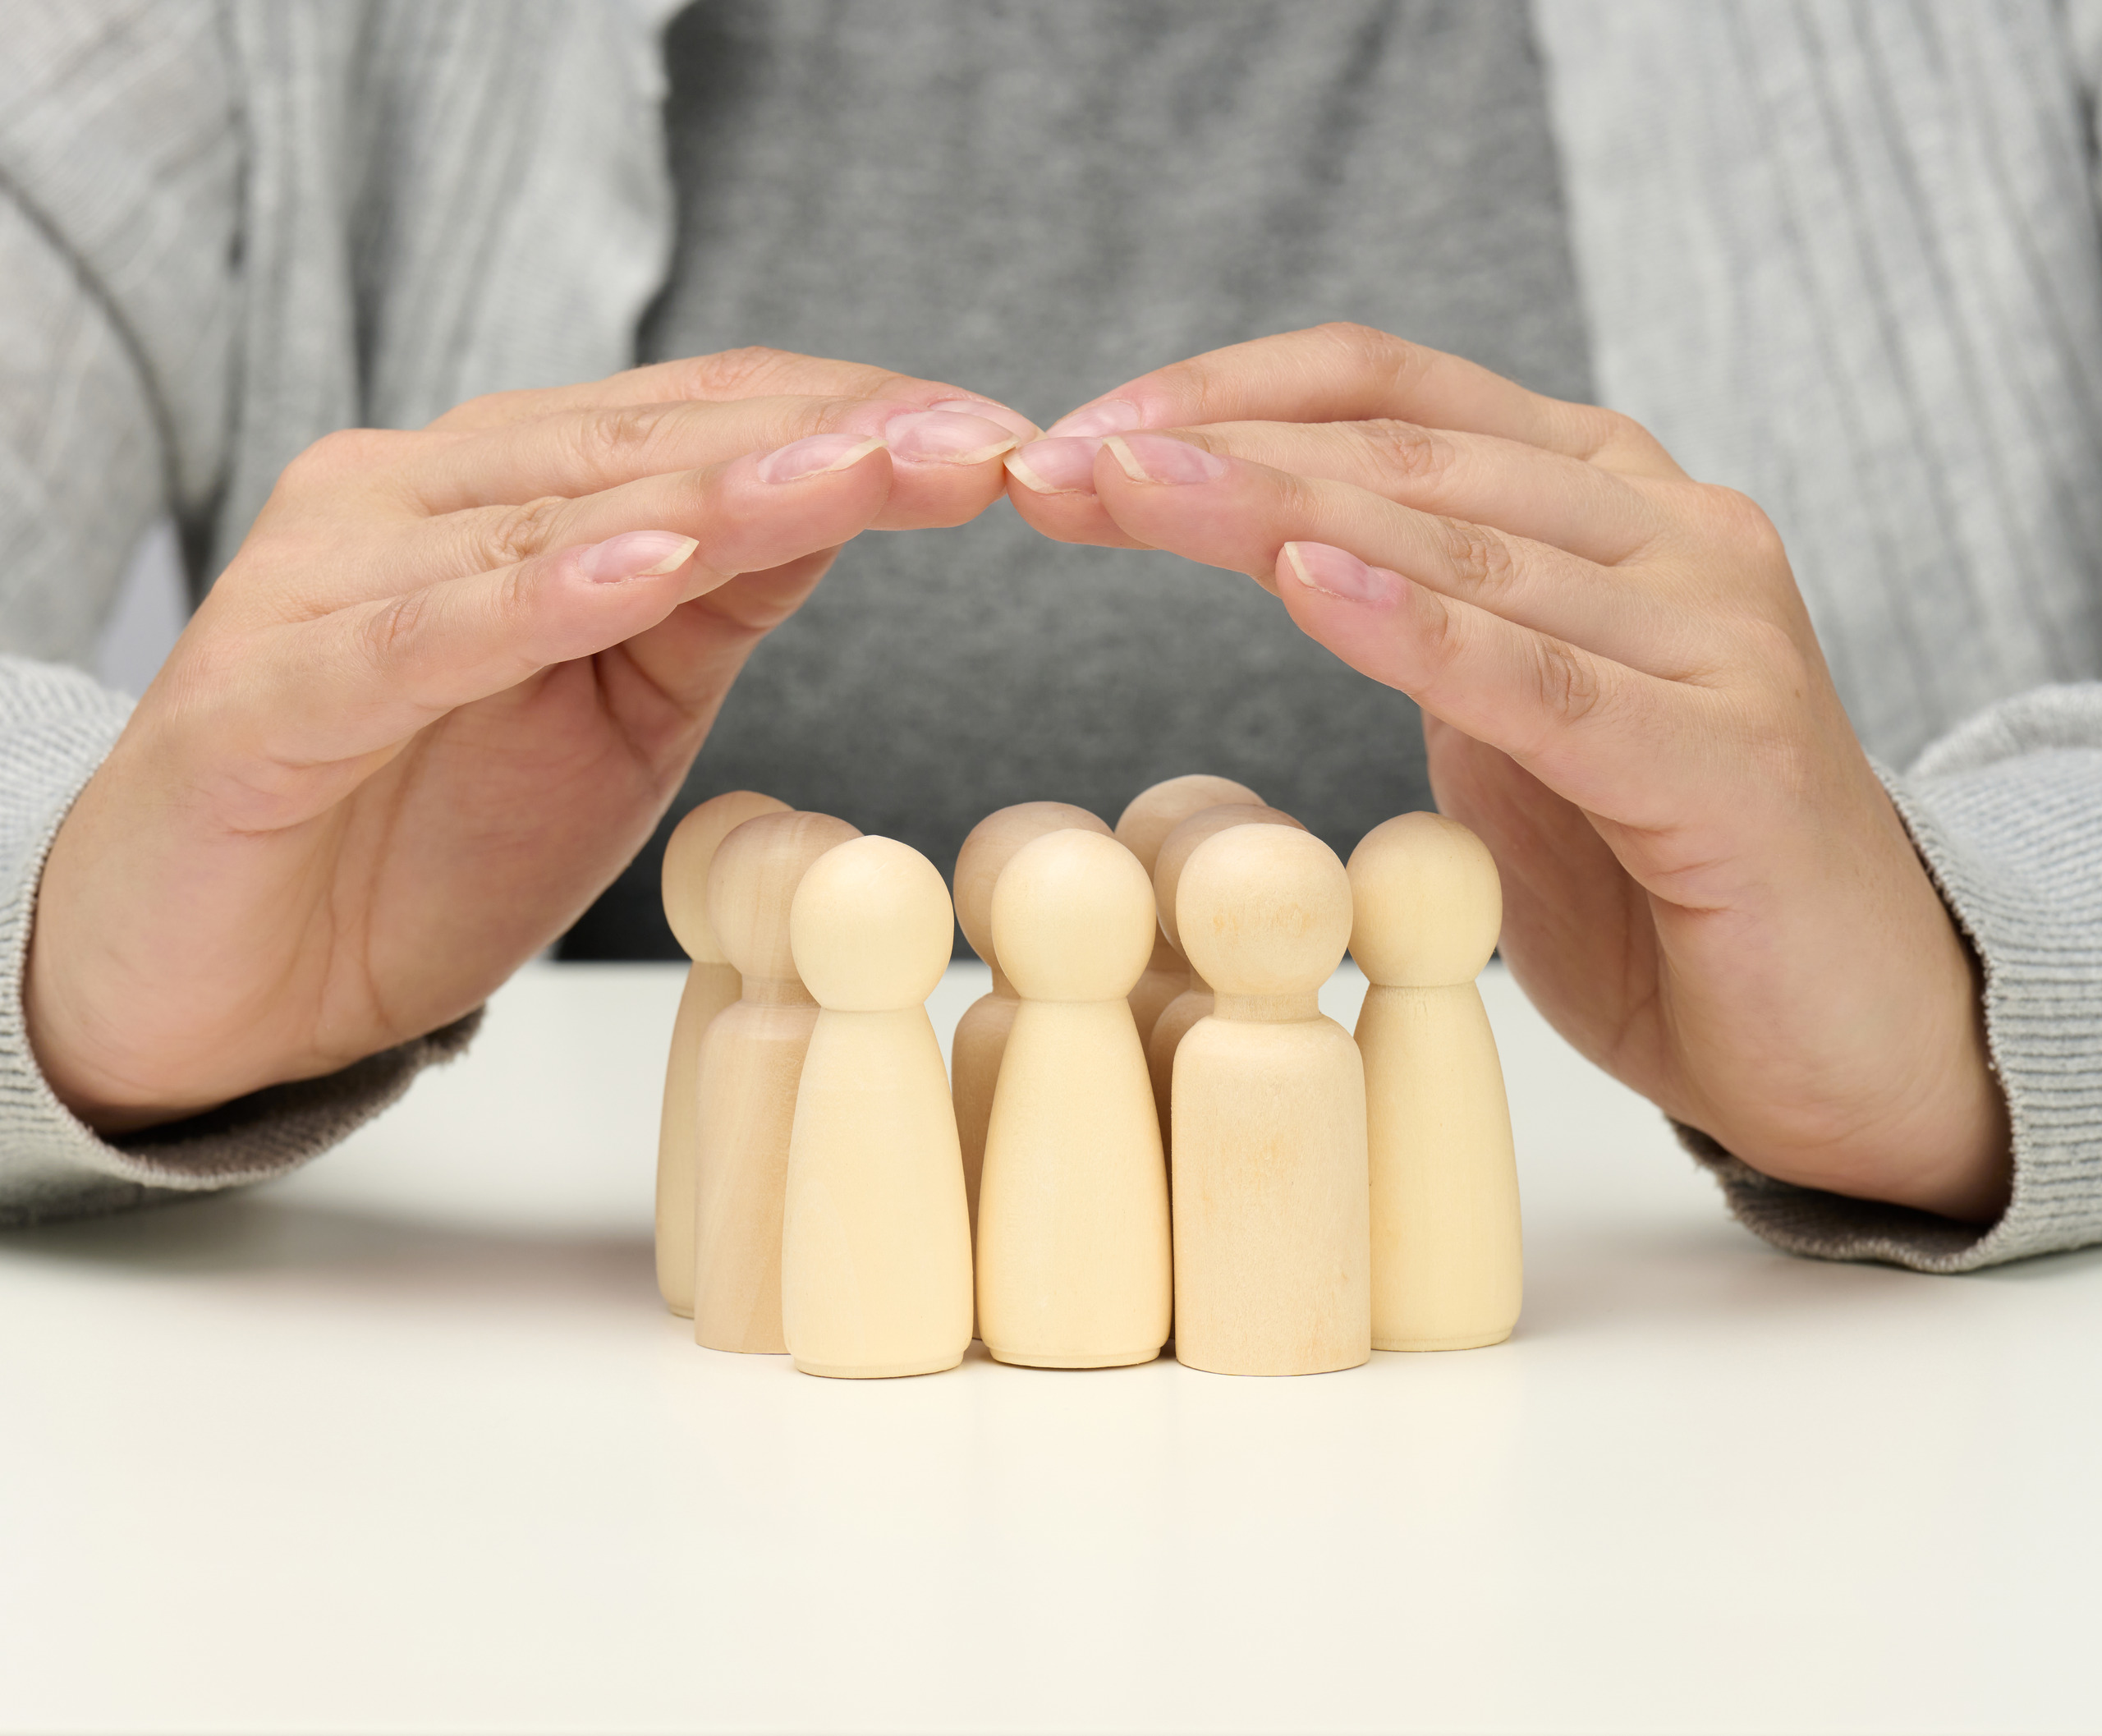 A woman's hands holding a group of wooden figures illustrating the importance of life insurance.